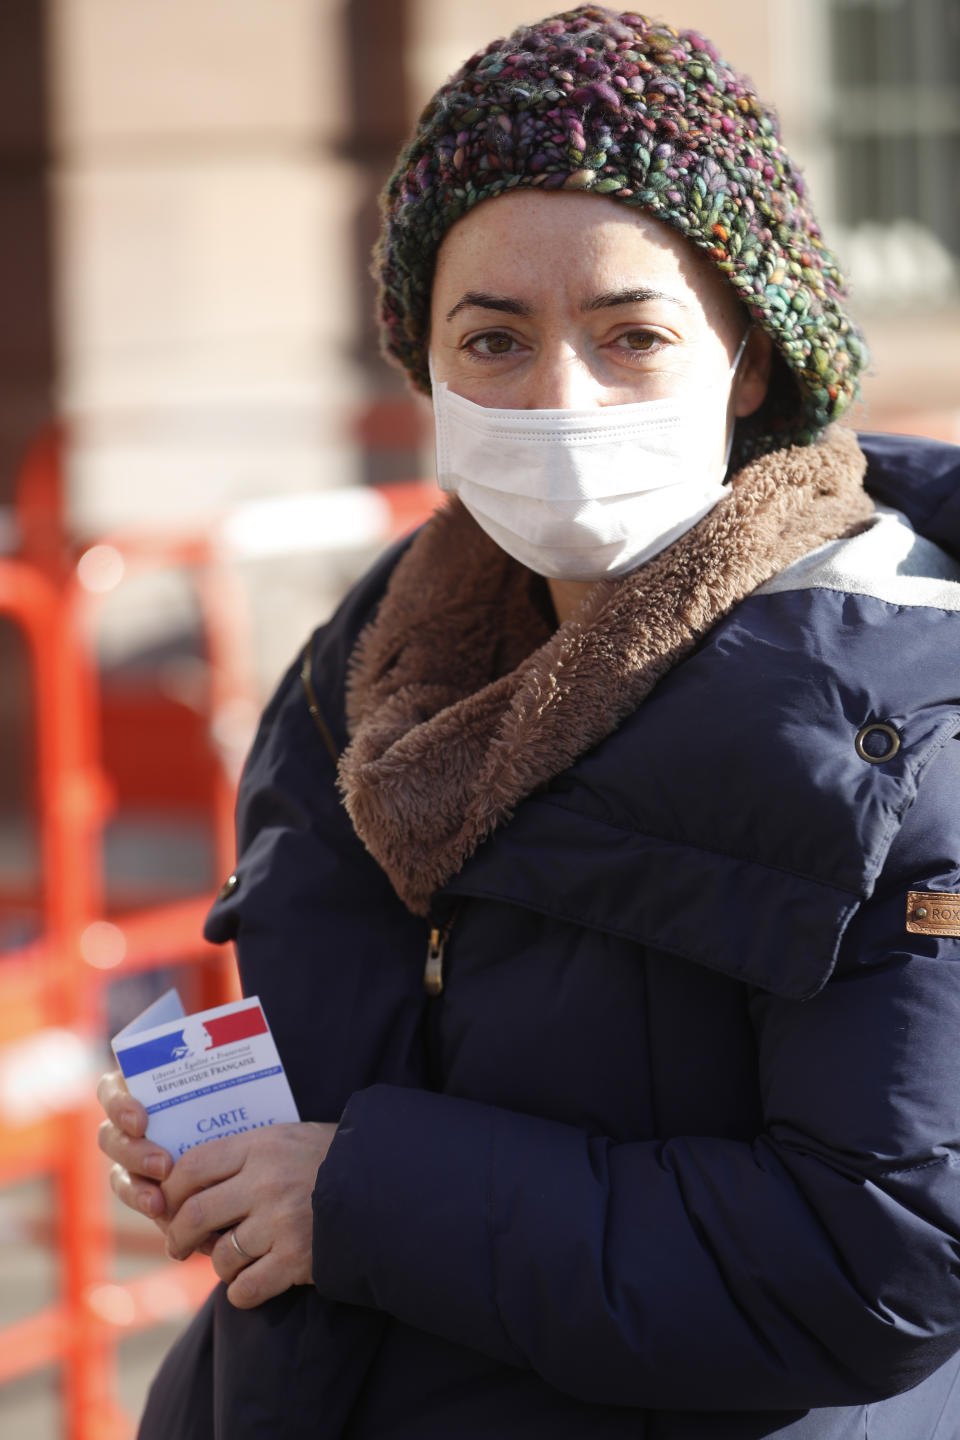 A woman wearing a face mask holds her voting card before voting in the first round of the municipal elections, in Strasbourg, eastern France, Sunday March 15, 2020. The new virus has shuttered all schools, banished cheek-kissing and upended daily life across France, but President Emmanuel Macron won't let it disrupt democracy, so he's maintaining nationwide elections this weekend. For most people, the new coronavirus causes only mild or moderate symptoms. For some it can cause more severe illness. (AP Photo/Jean-Francois Badias)